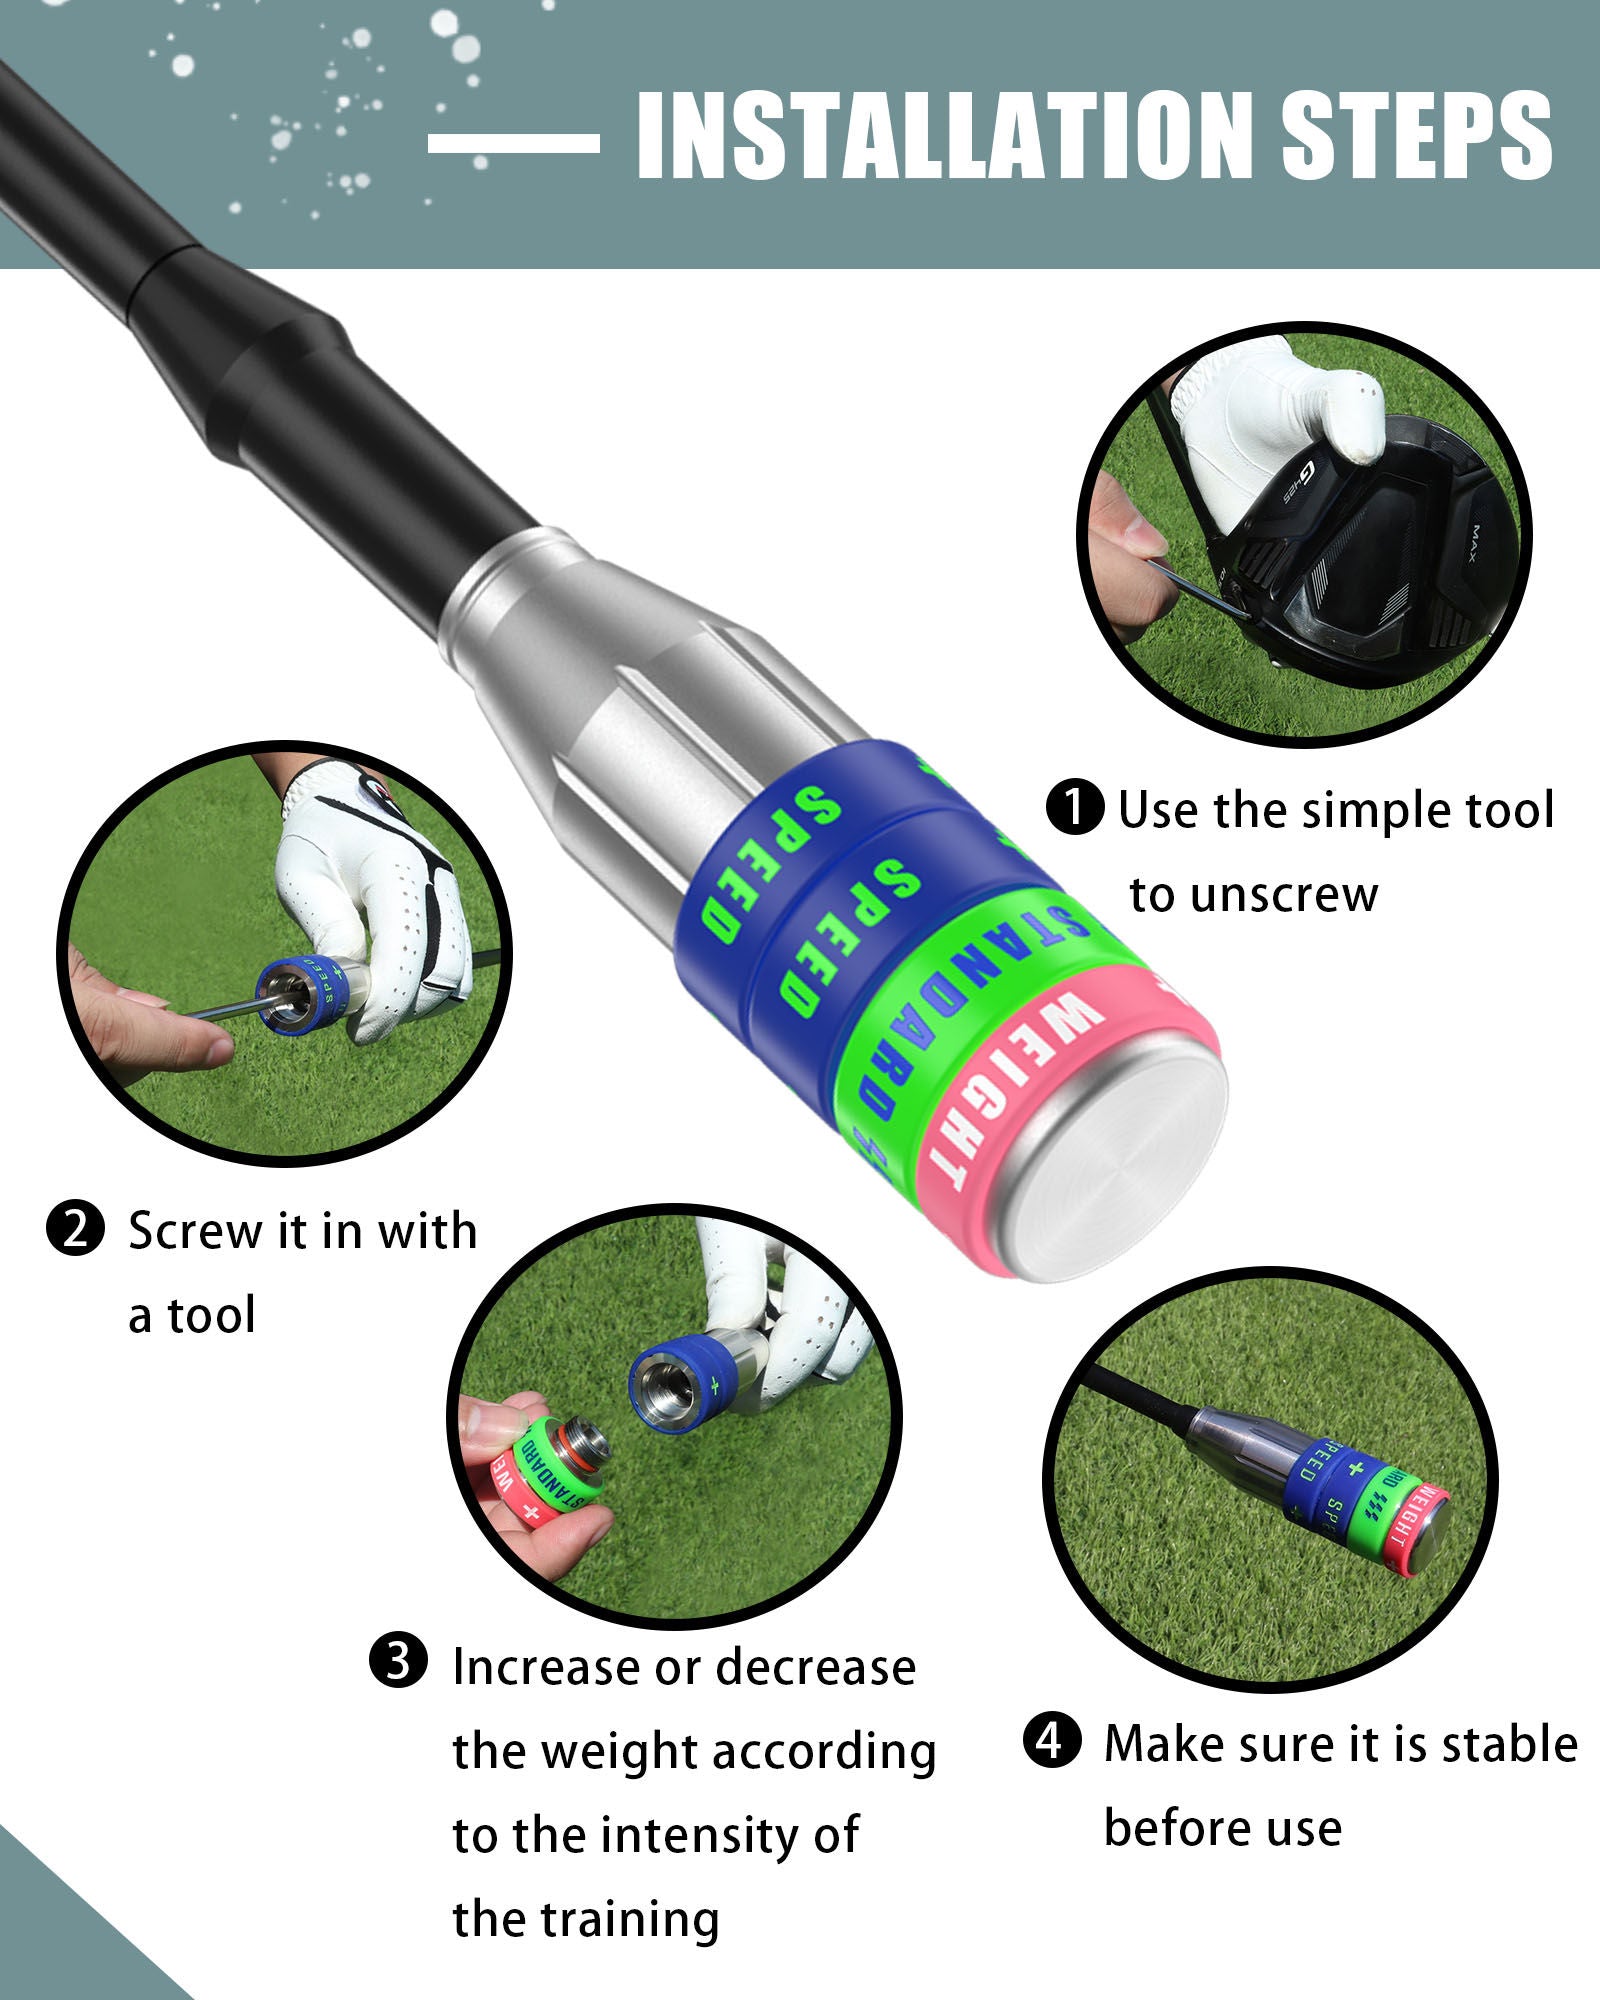 The golf swing speed training equipment is easy to install.